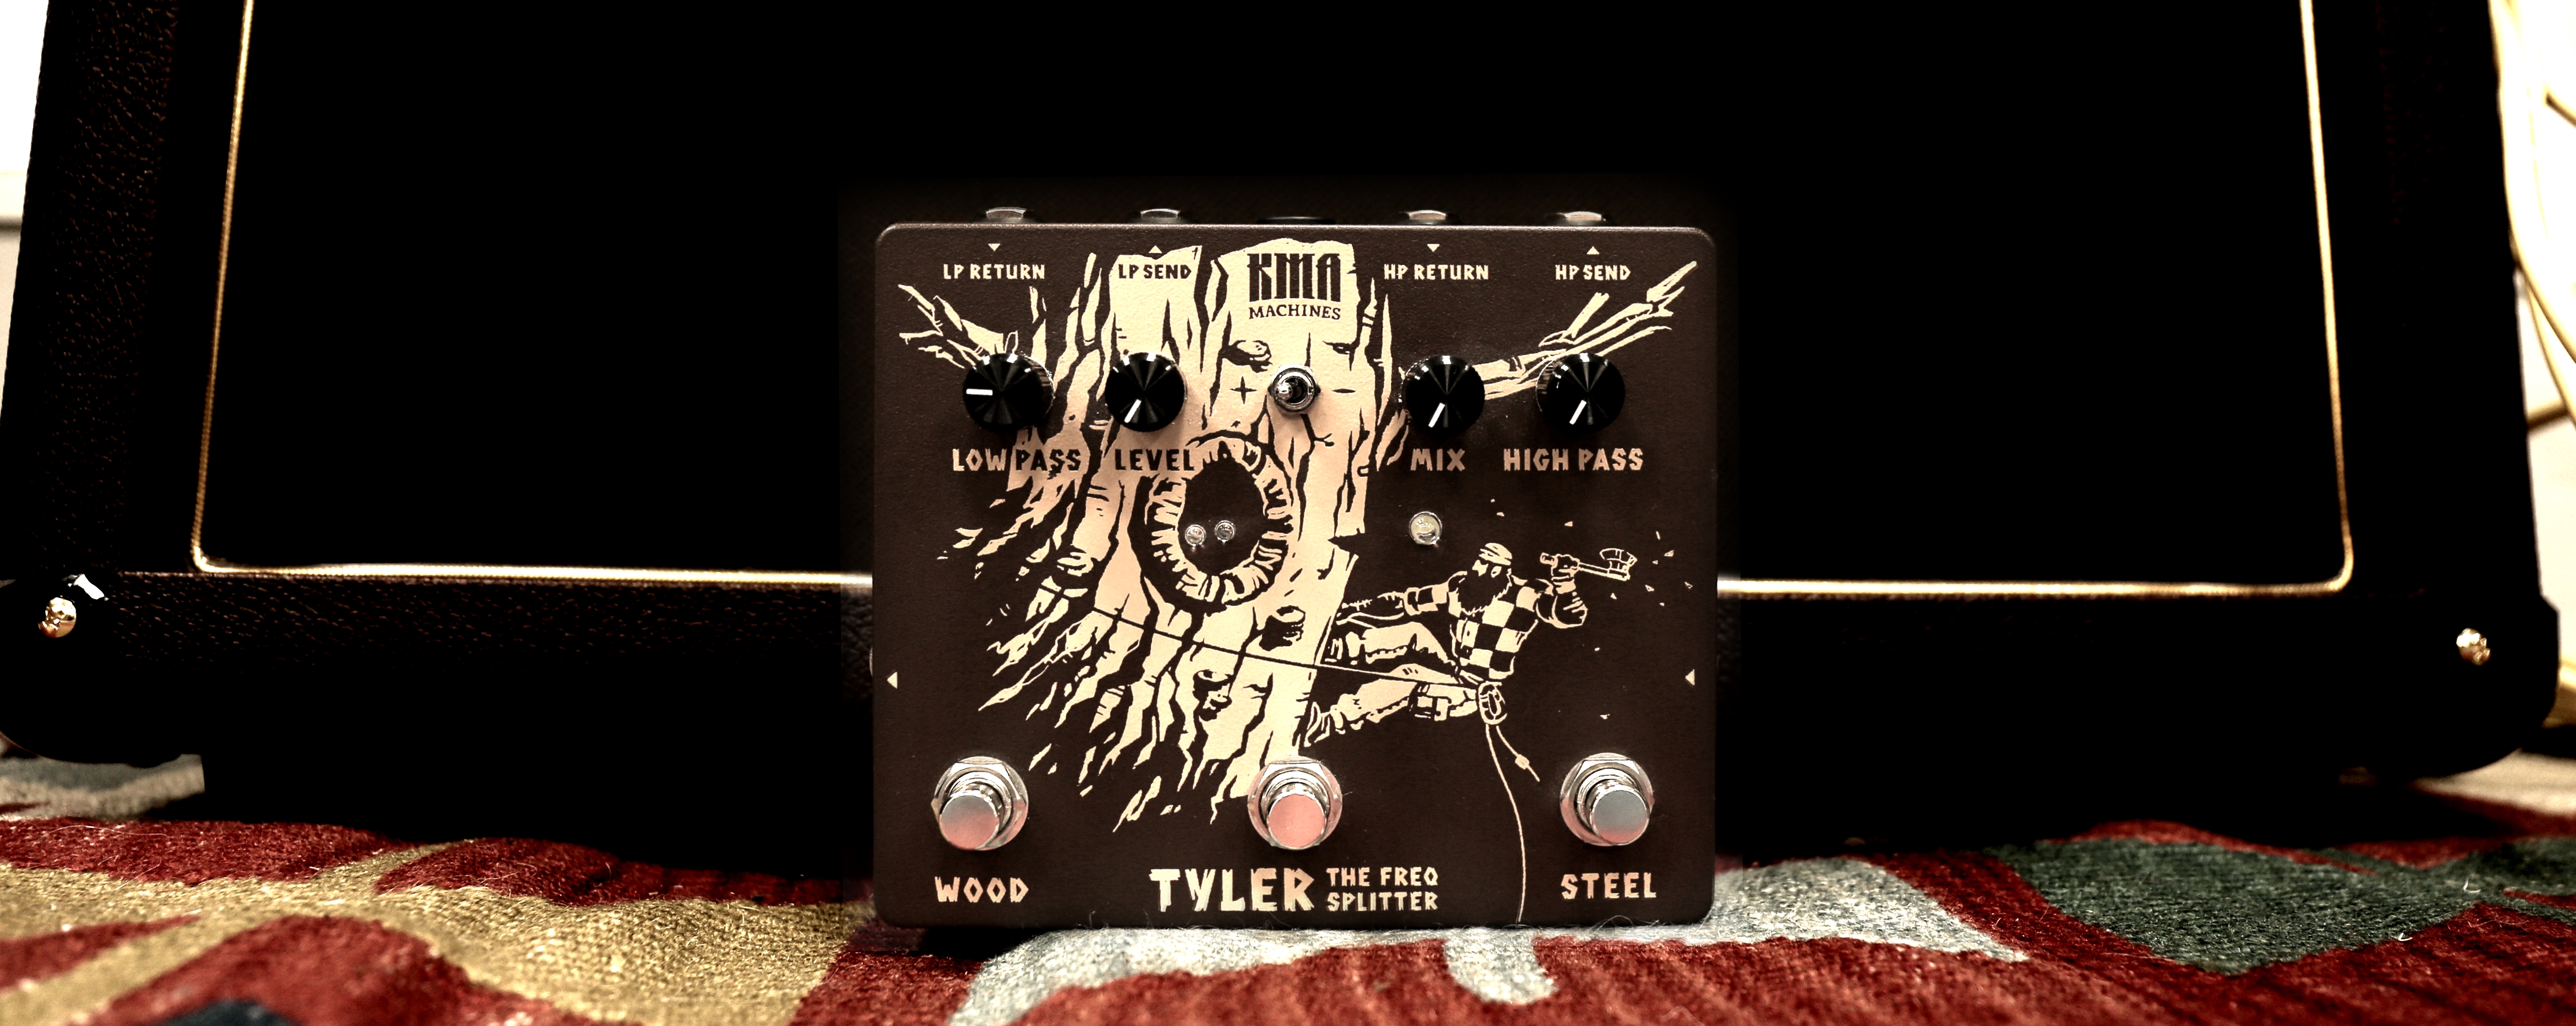 KMA ‘Tyler’ pedal – Finally, a frequency splitter made for musicians (Review)